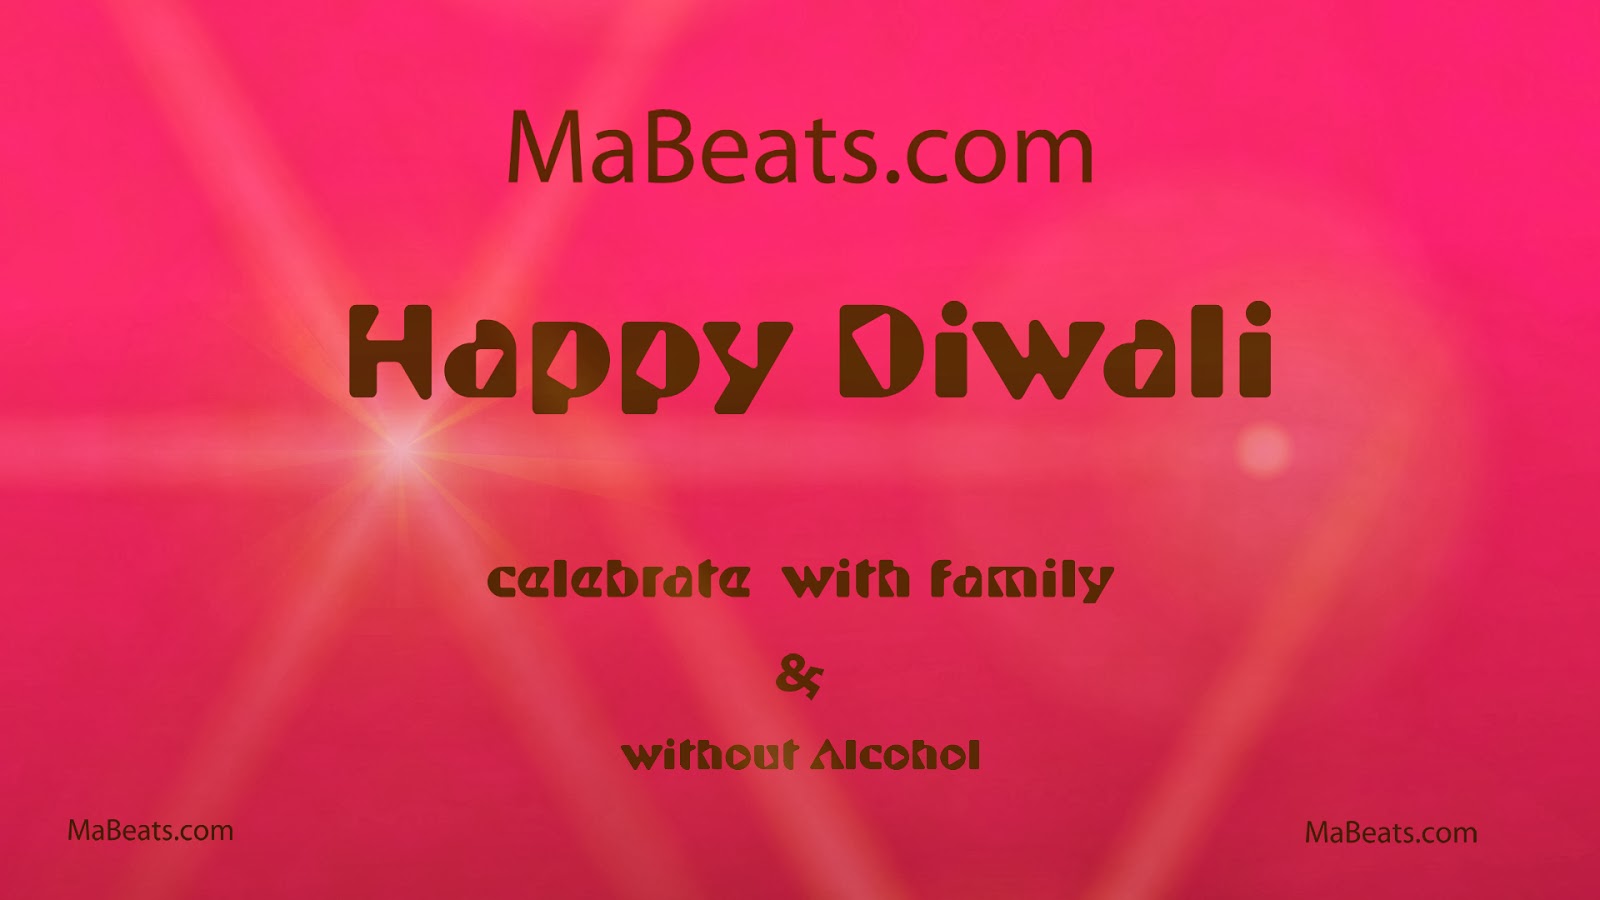 Happy Diwali - celebrate with family and without Alcohol 